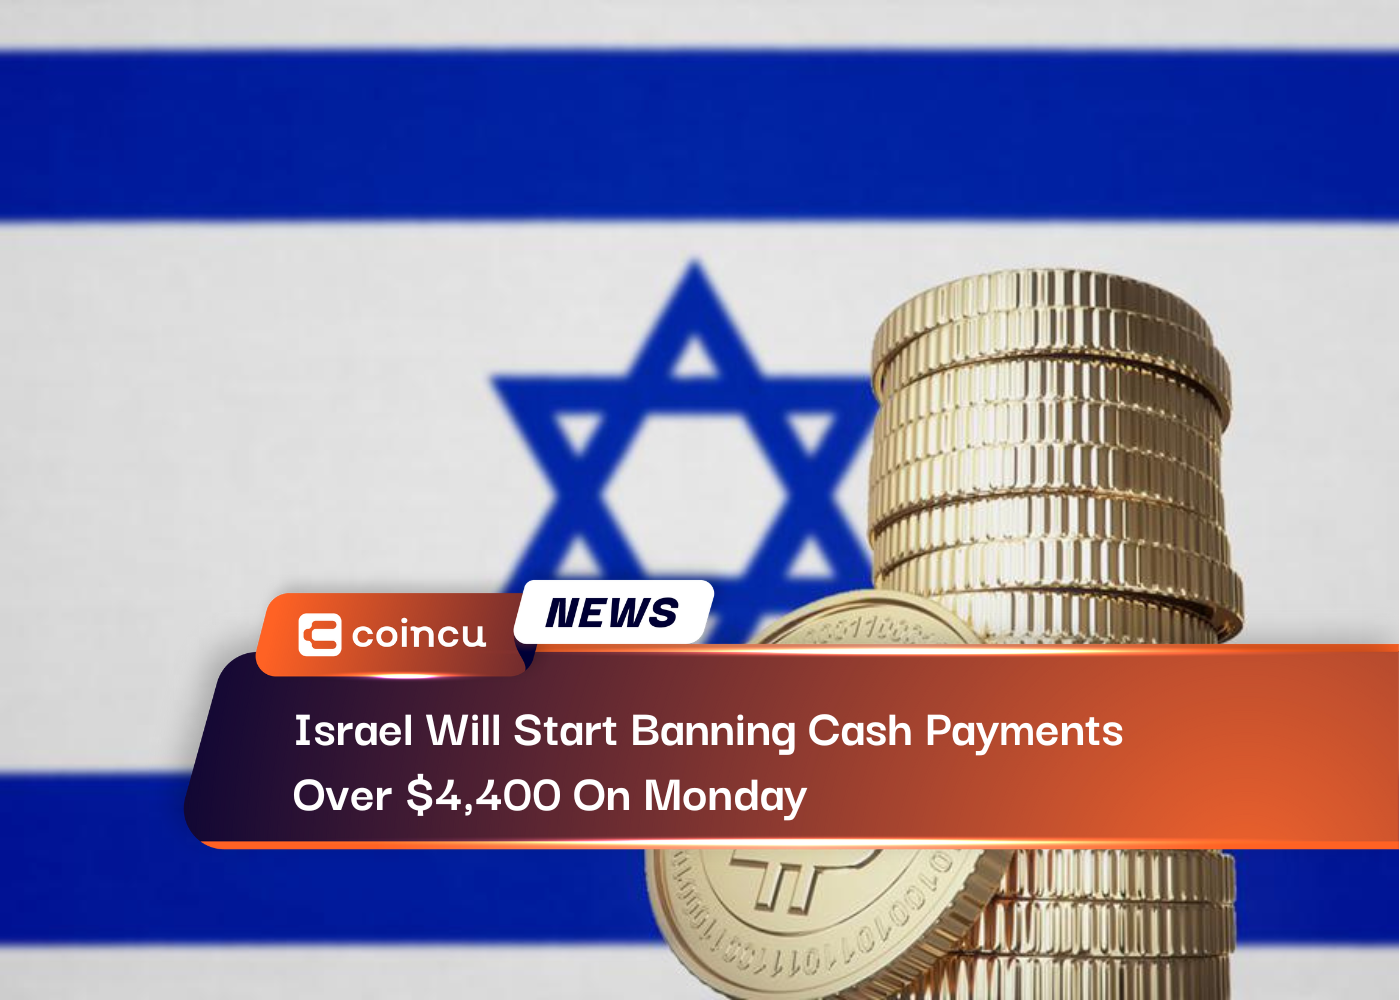 Israel Will Start Banning Cash Payments